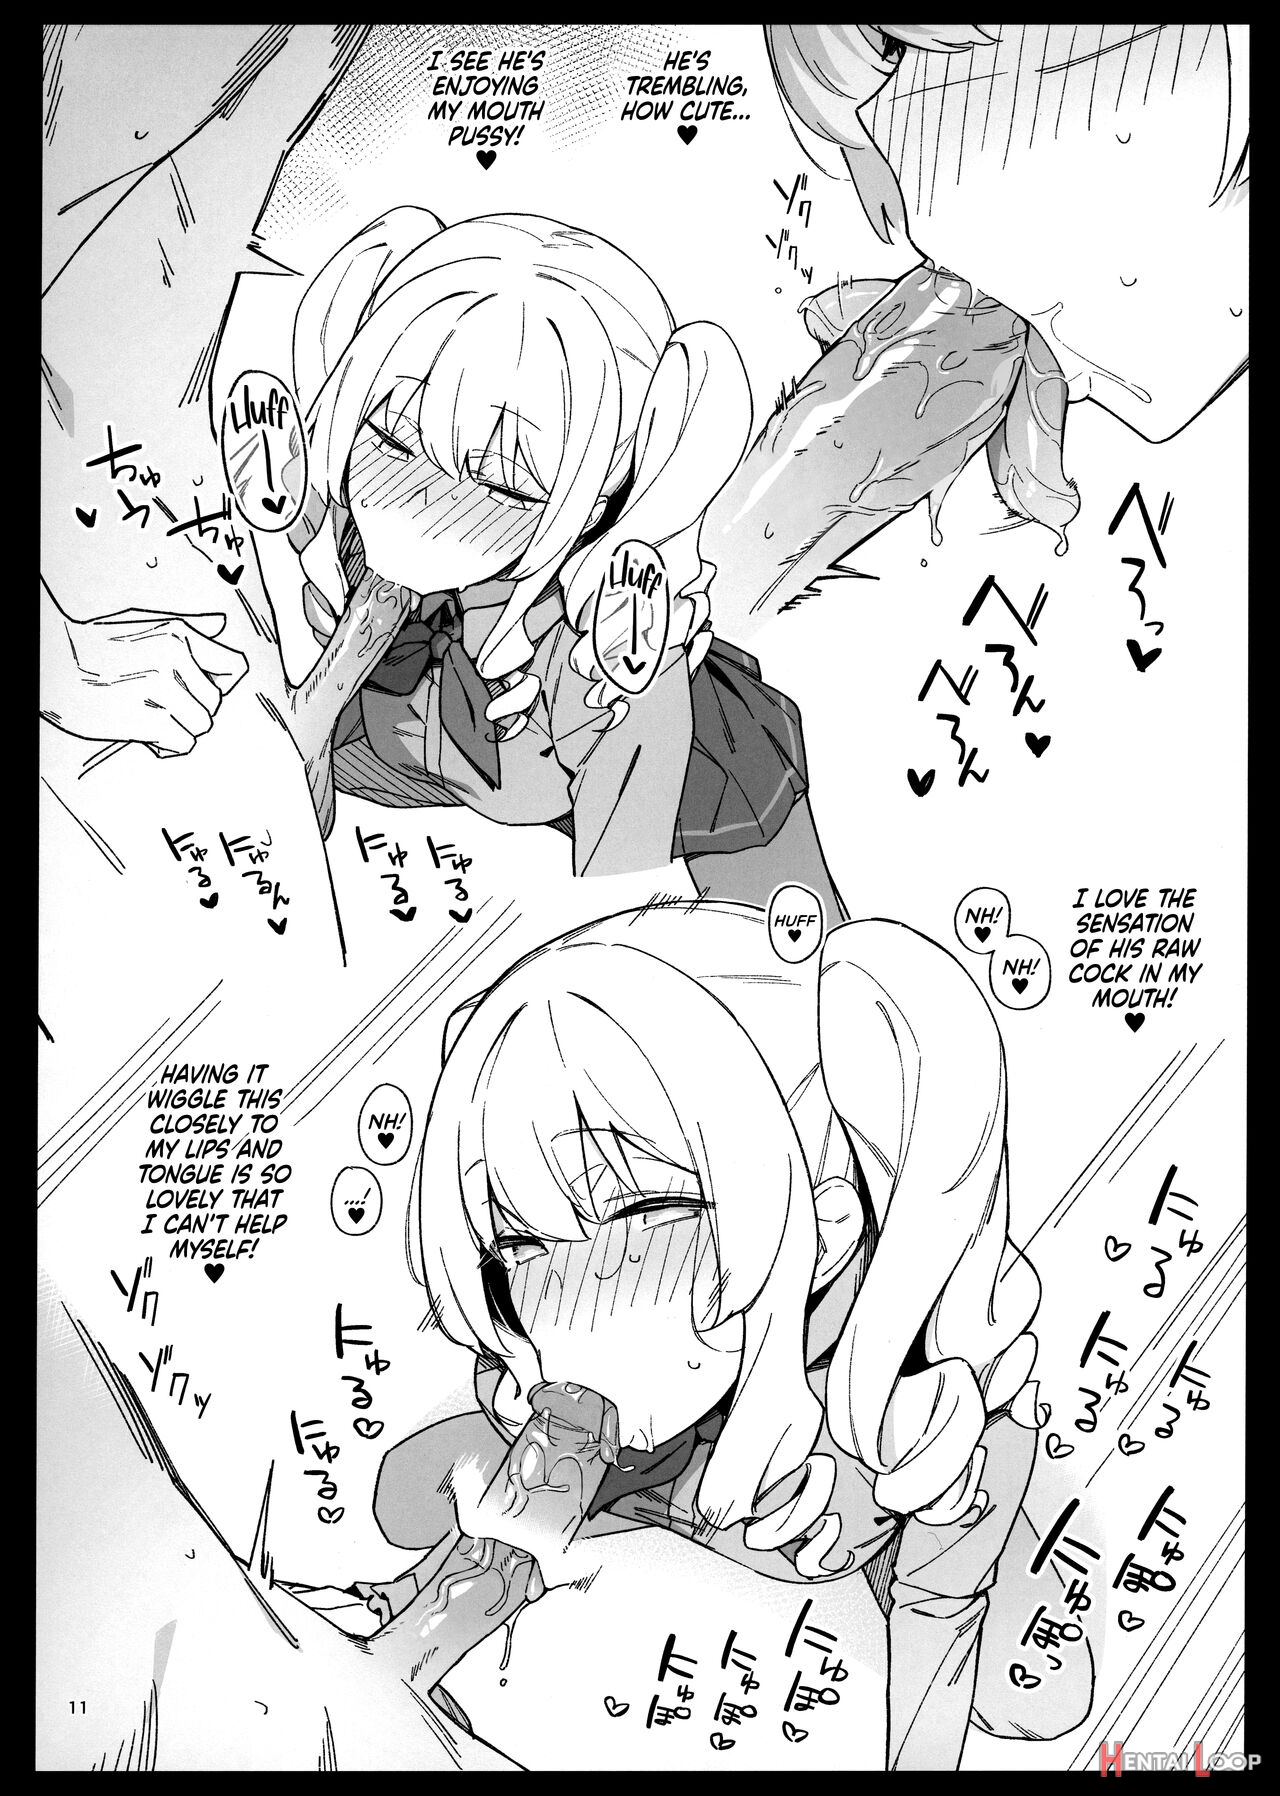 Warship Marriage Lewd Records 4 page 11